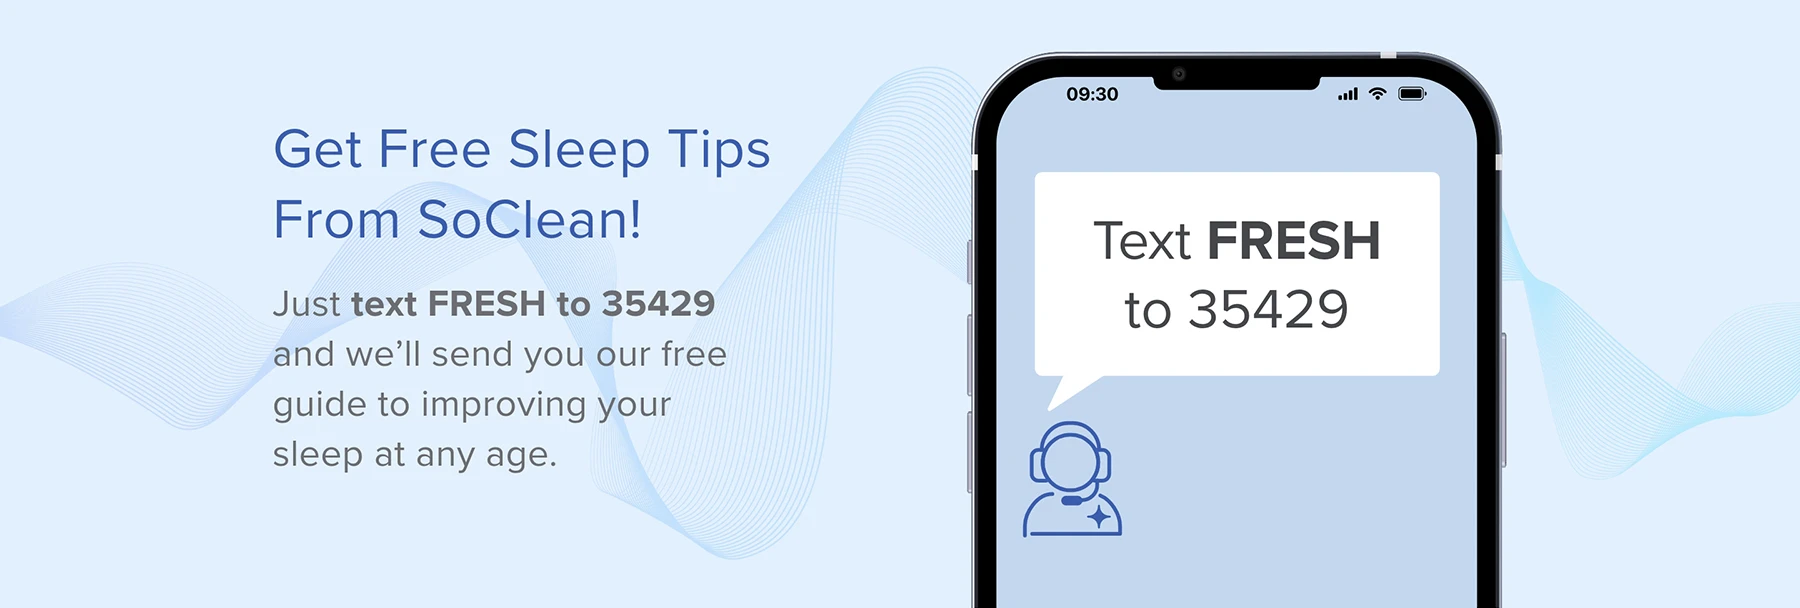 Get Free Sleep Tips From SoClean!